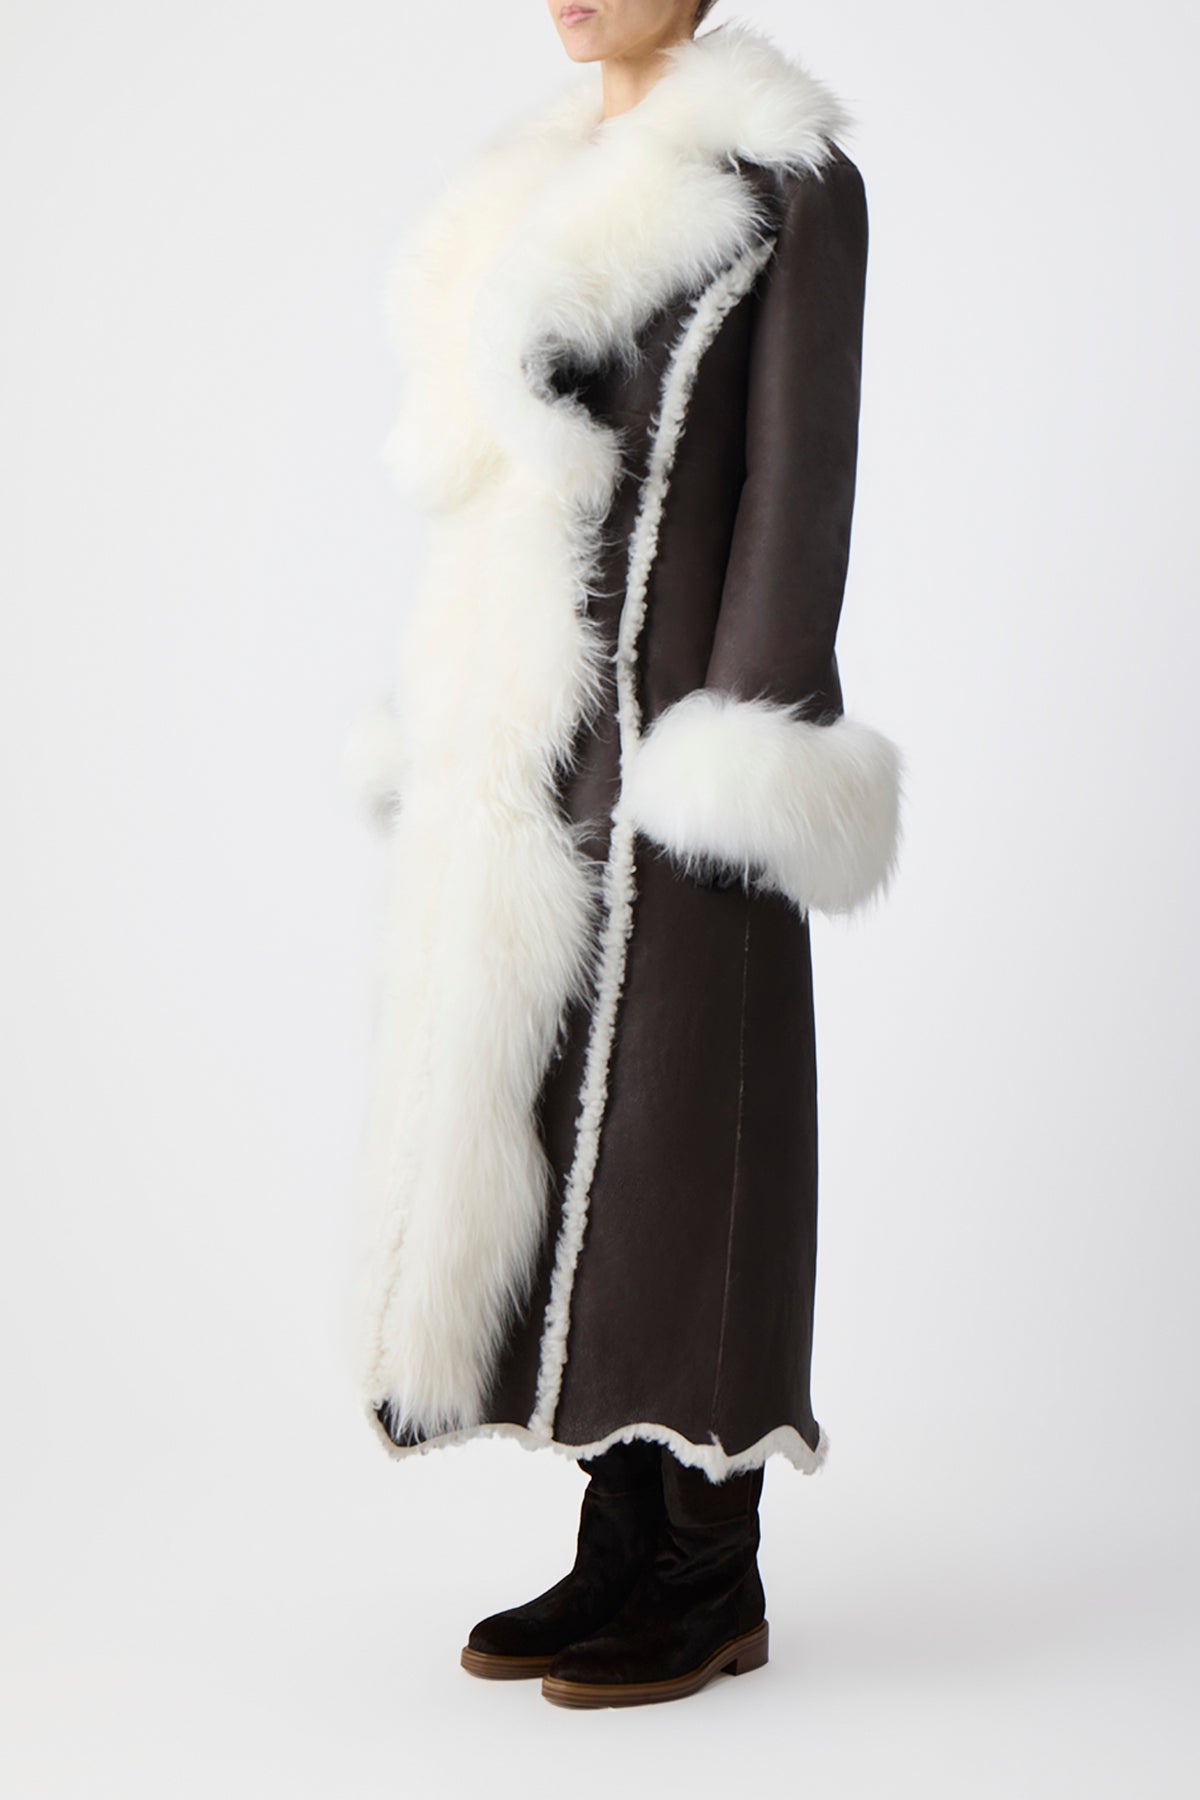 Prufrock Coat in Chocolate & Ivory Cashmere Shearling